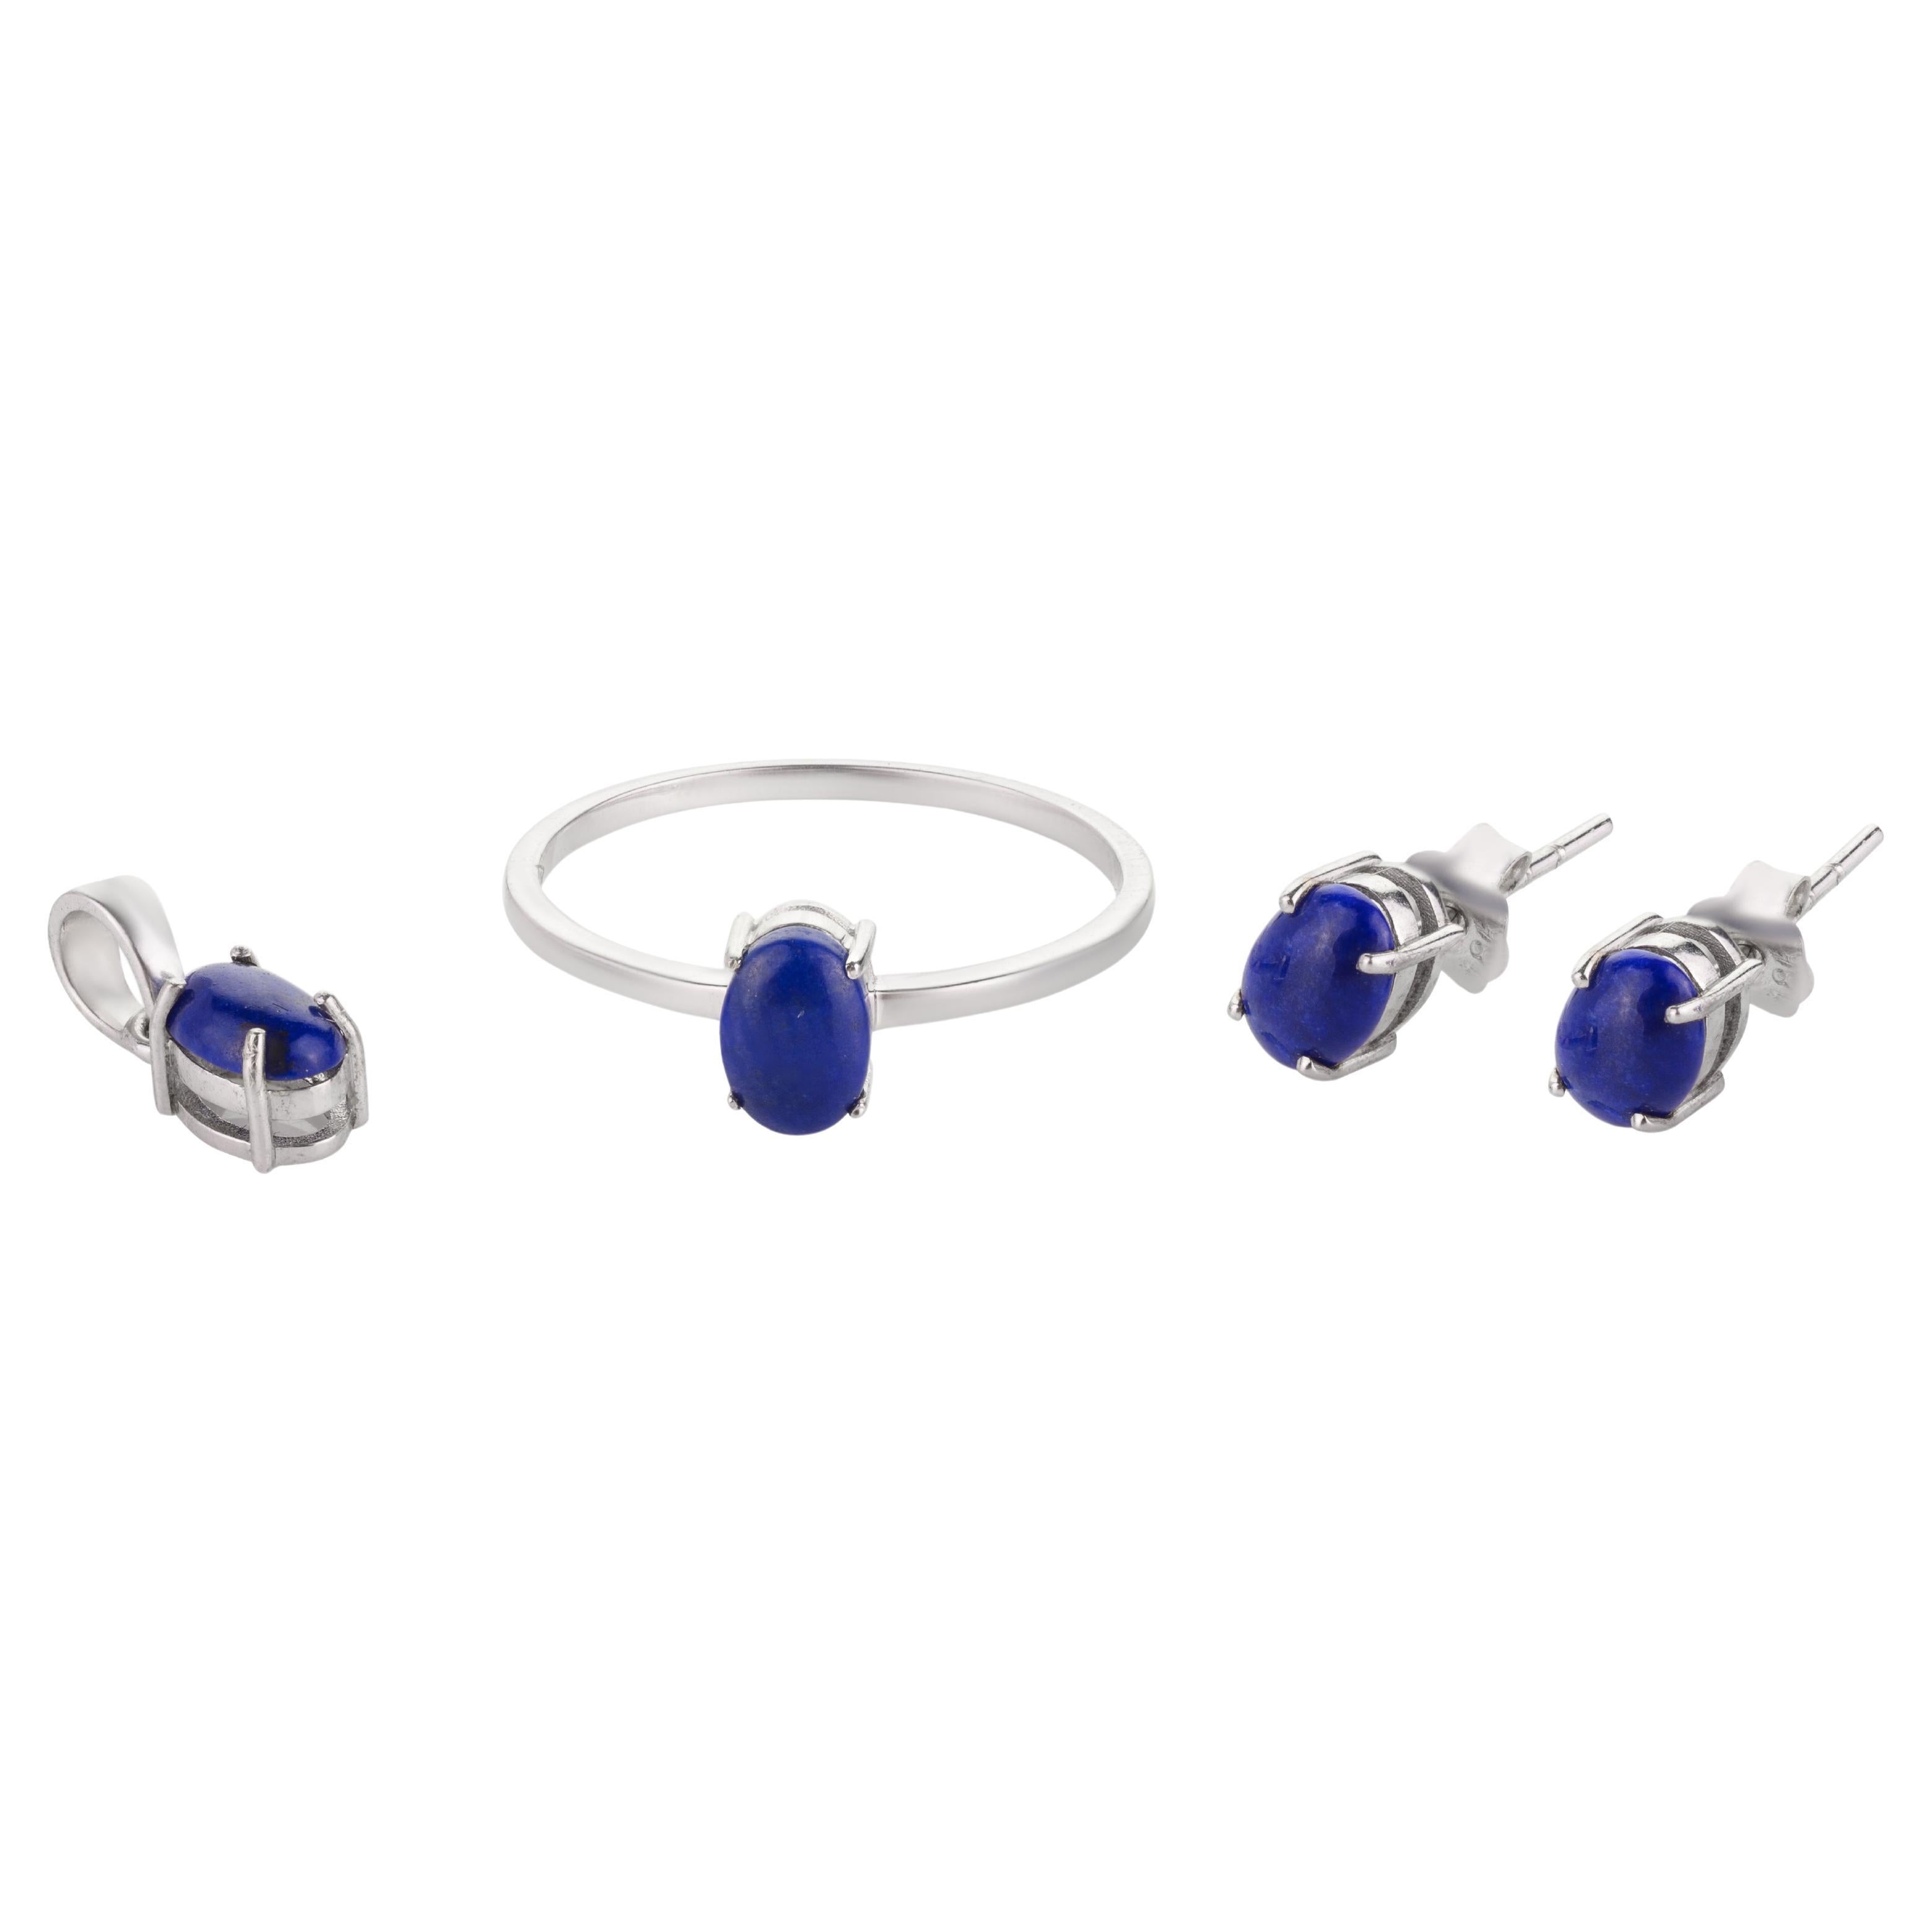 For Sale:  Lapis Lazuli Ring, Pendant and Earrings Jewelry Set in 18k Solid White Gold